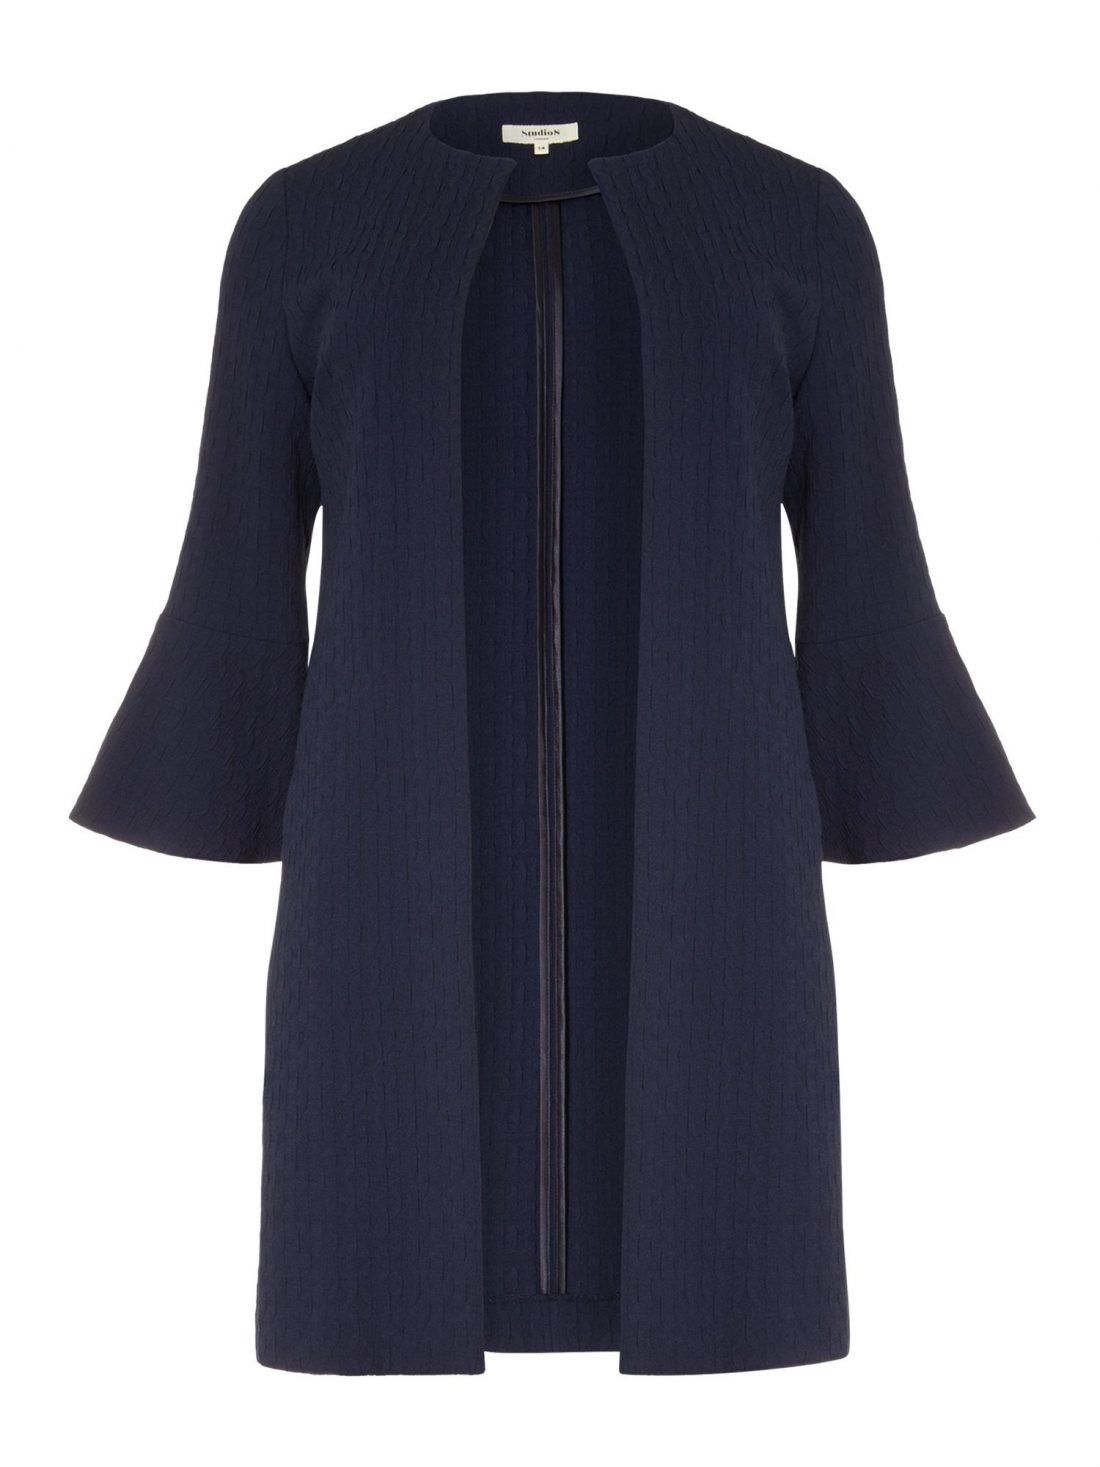 Give your outfit a spring spruce-up with these 8 duster coats